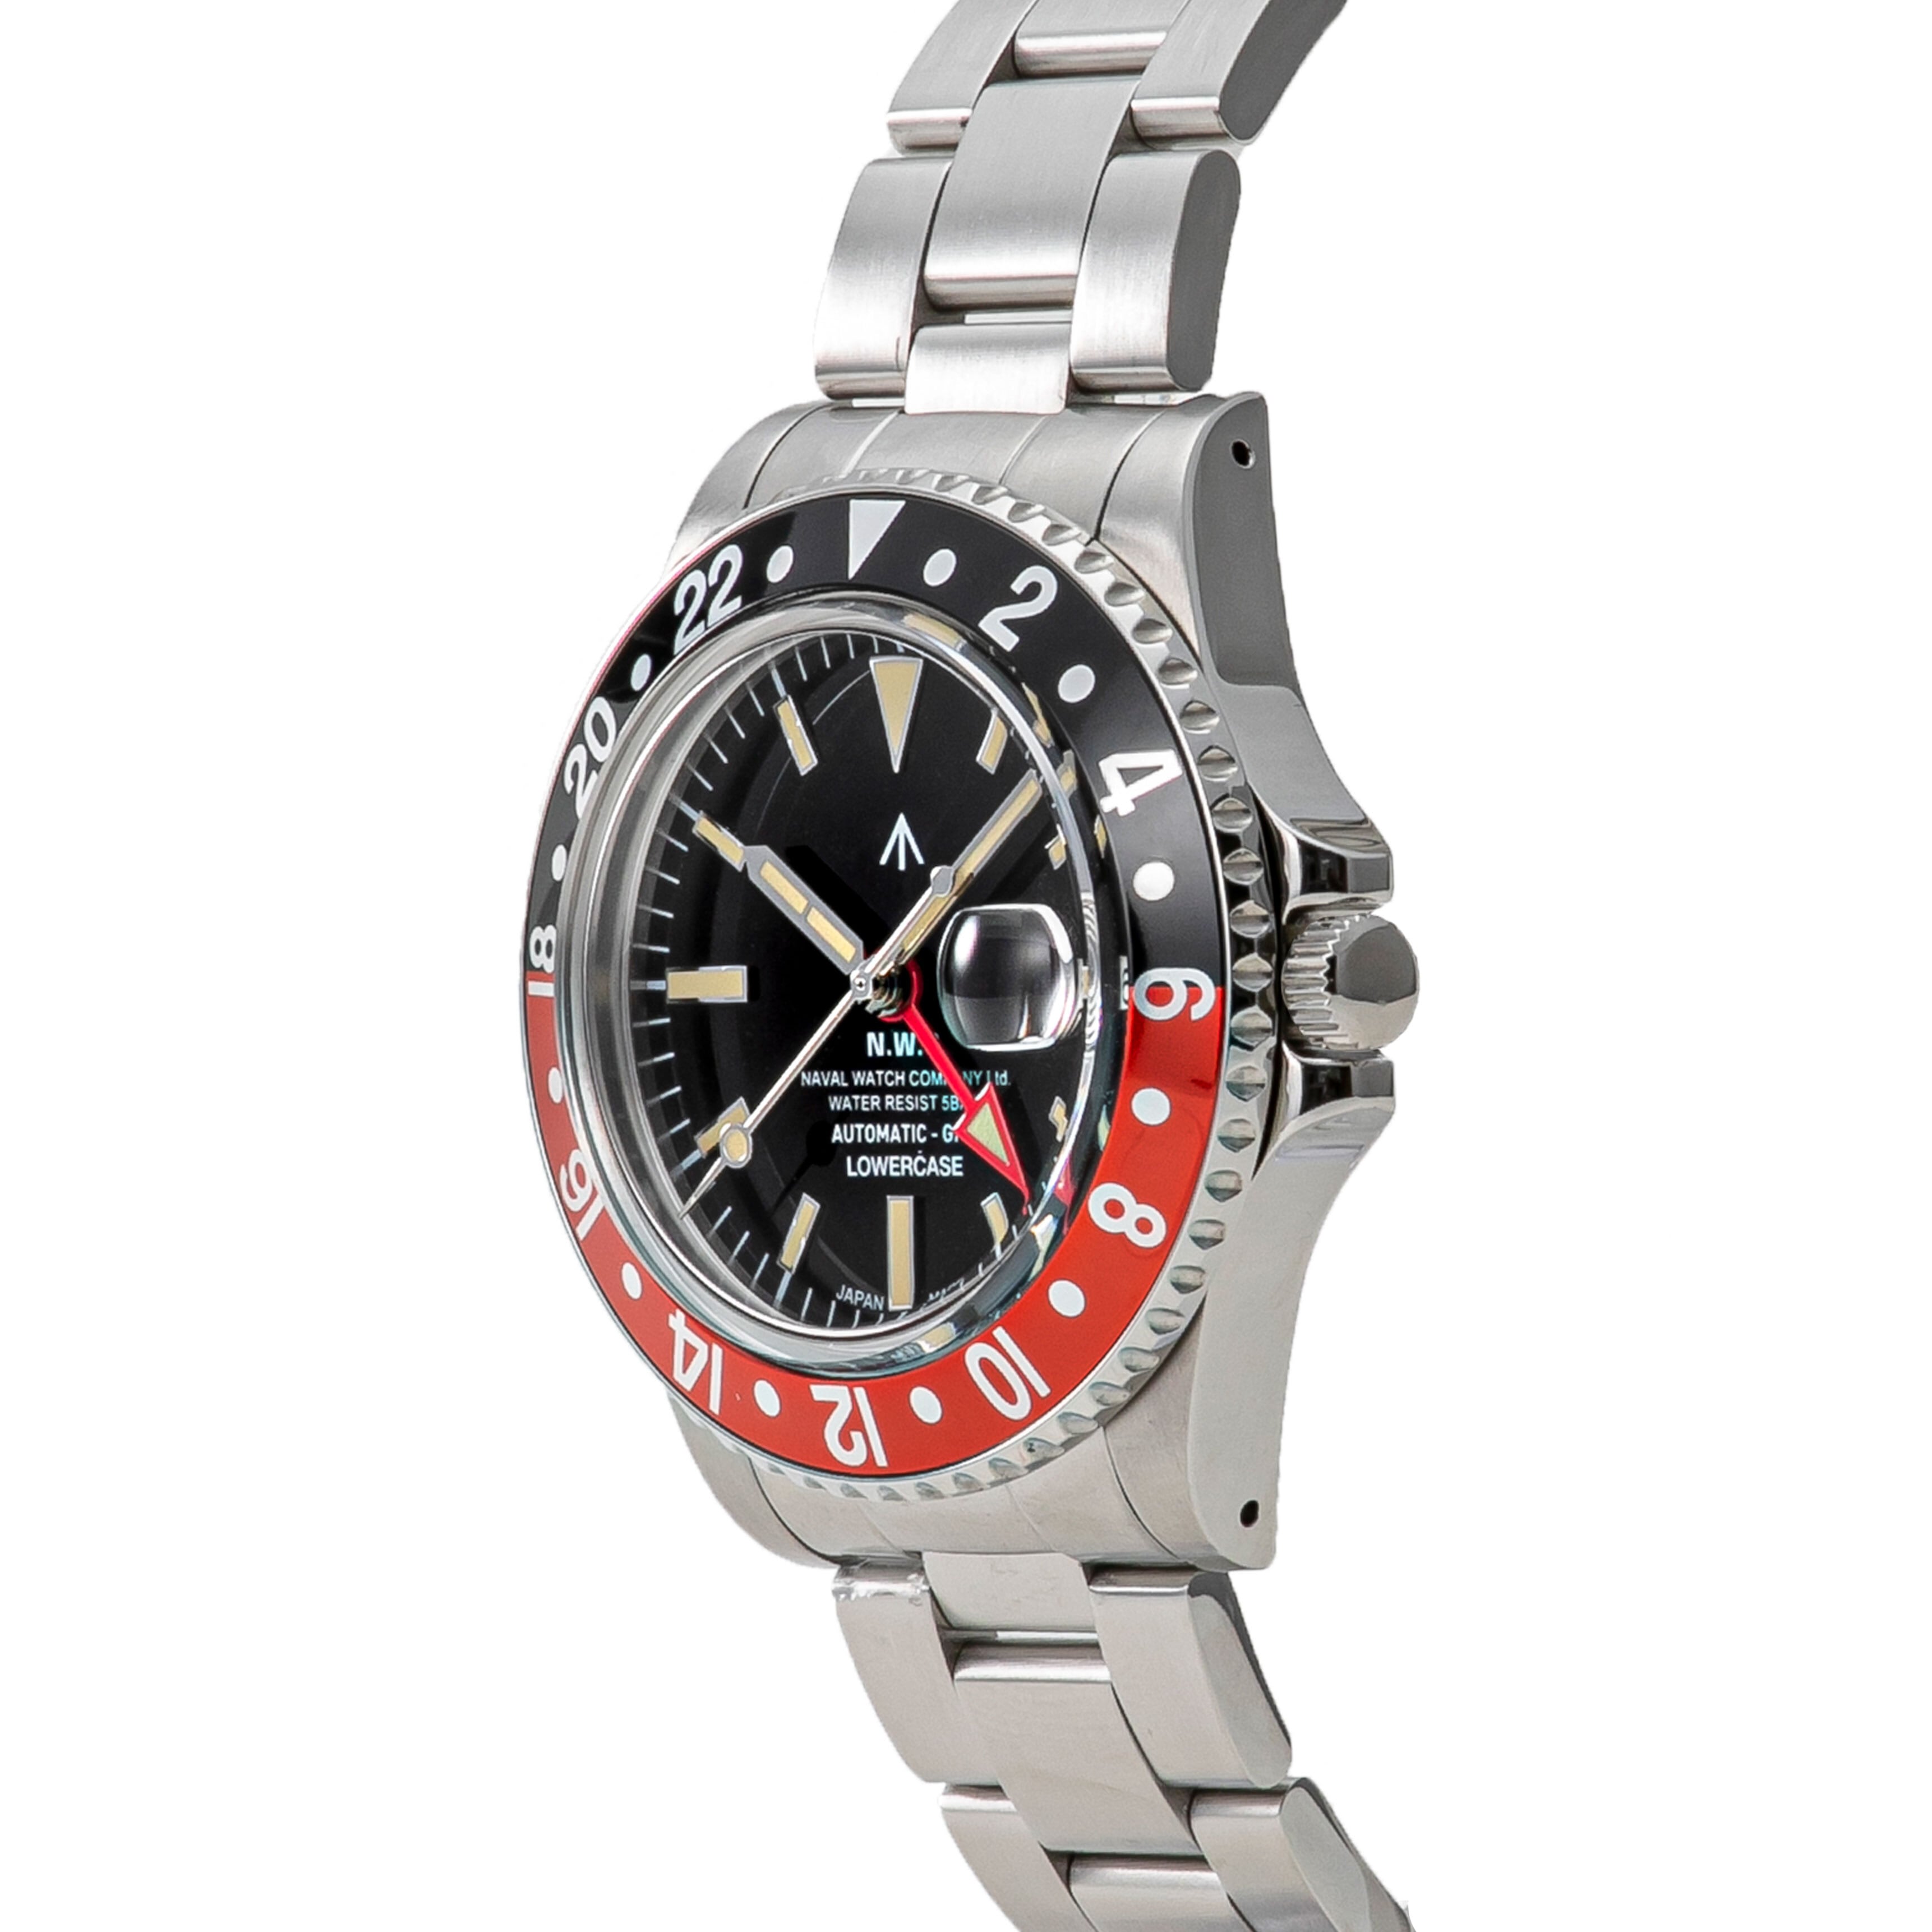 Naval Watch Produced By LOWERCASE FRXD004 GMT Mechanical S/S 3 ...